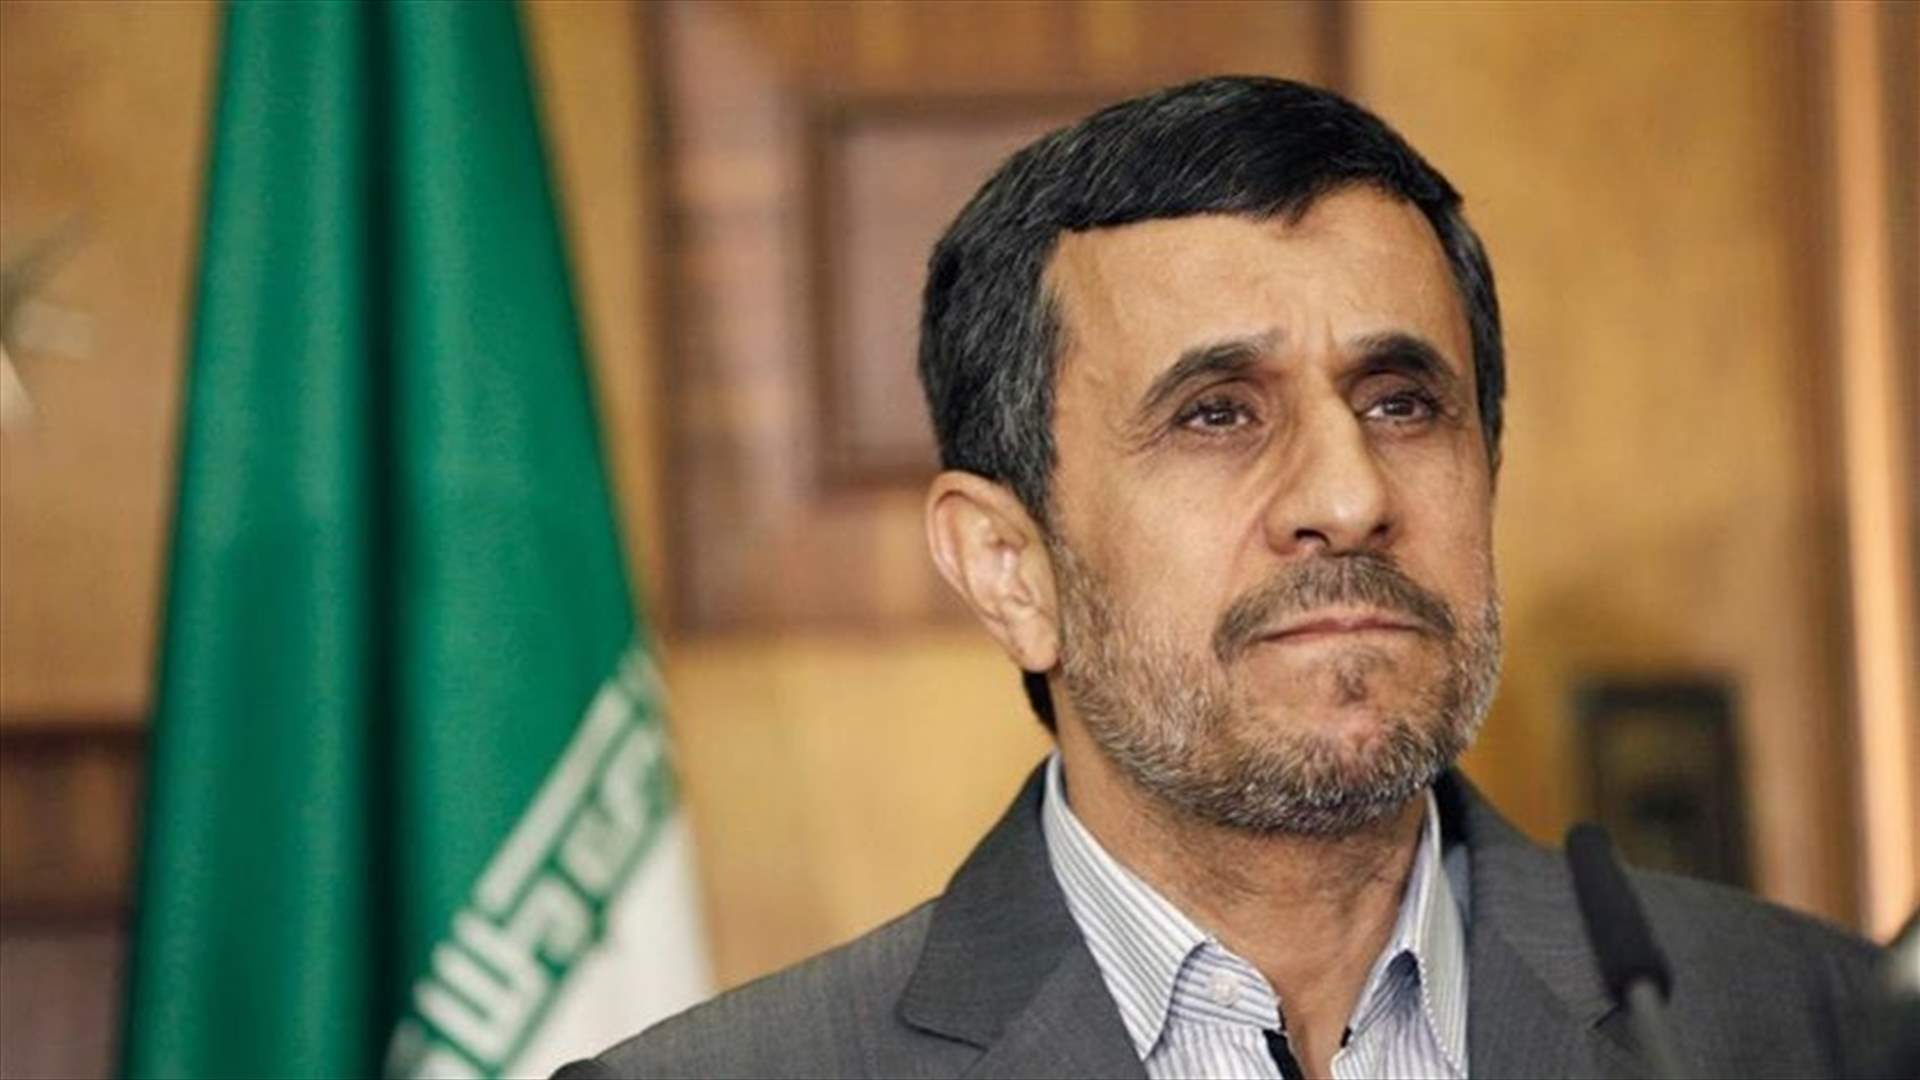 Ex-Iranian President Ahmadinejad submits name for presidential election